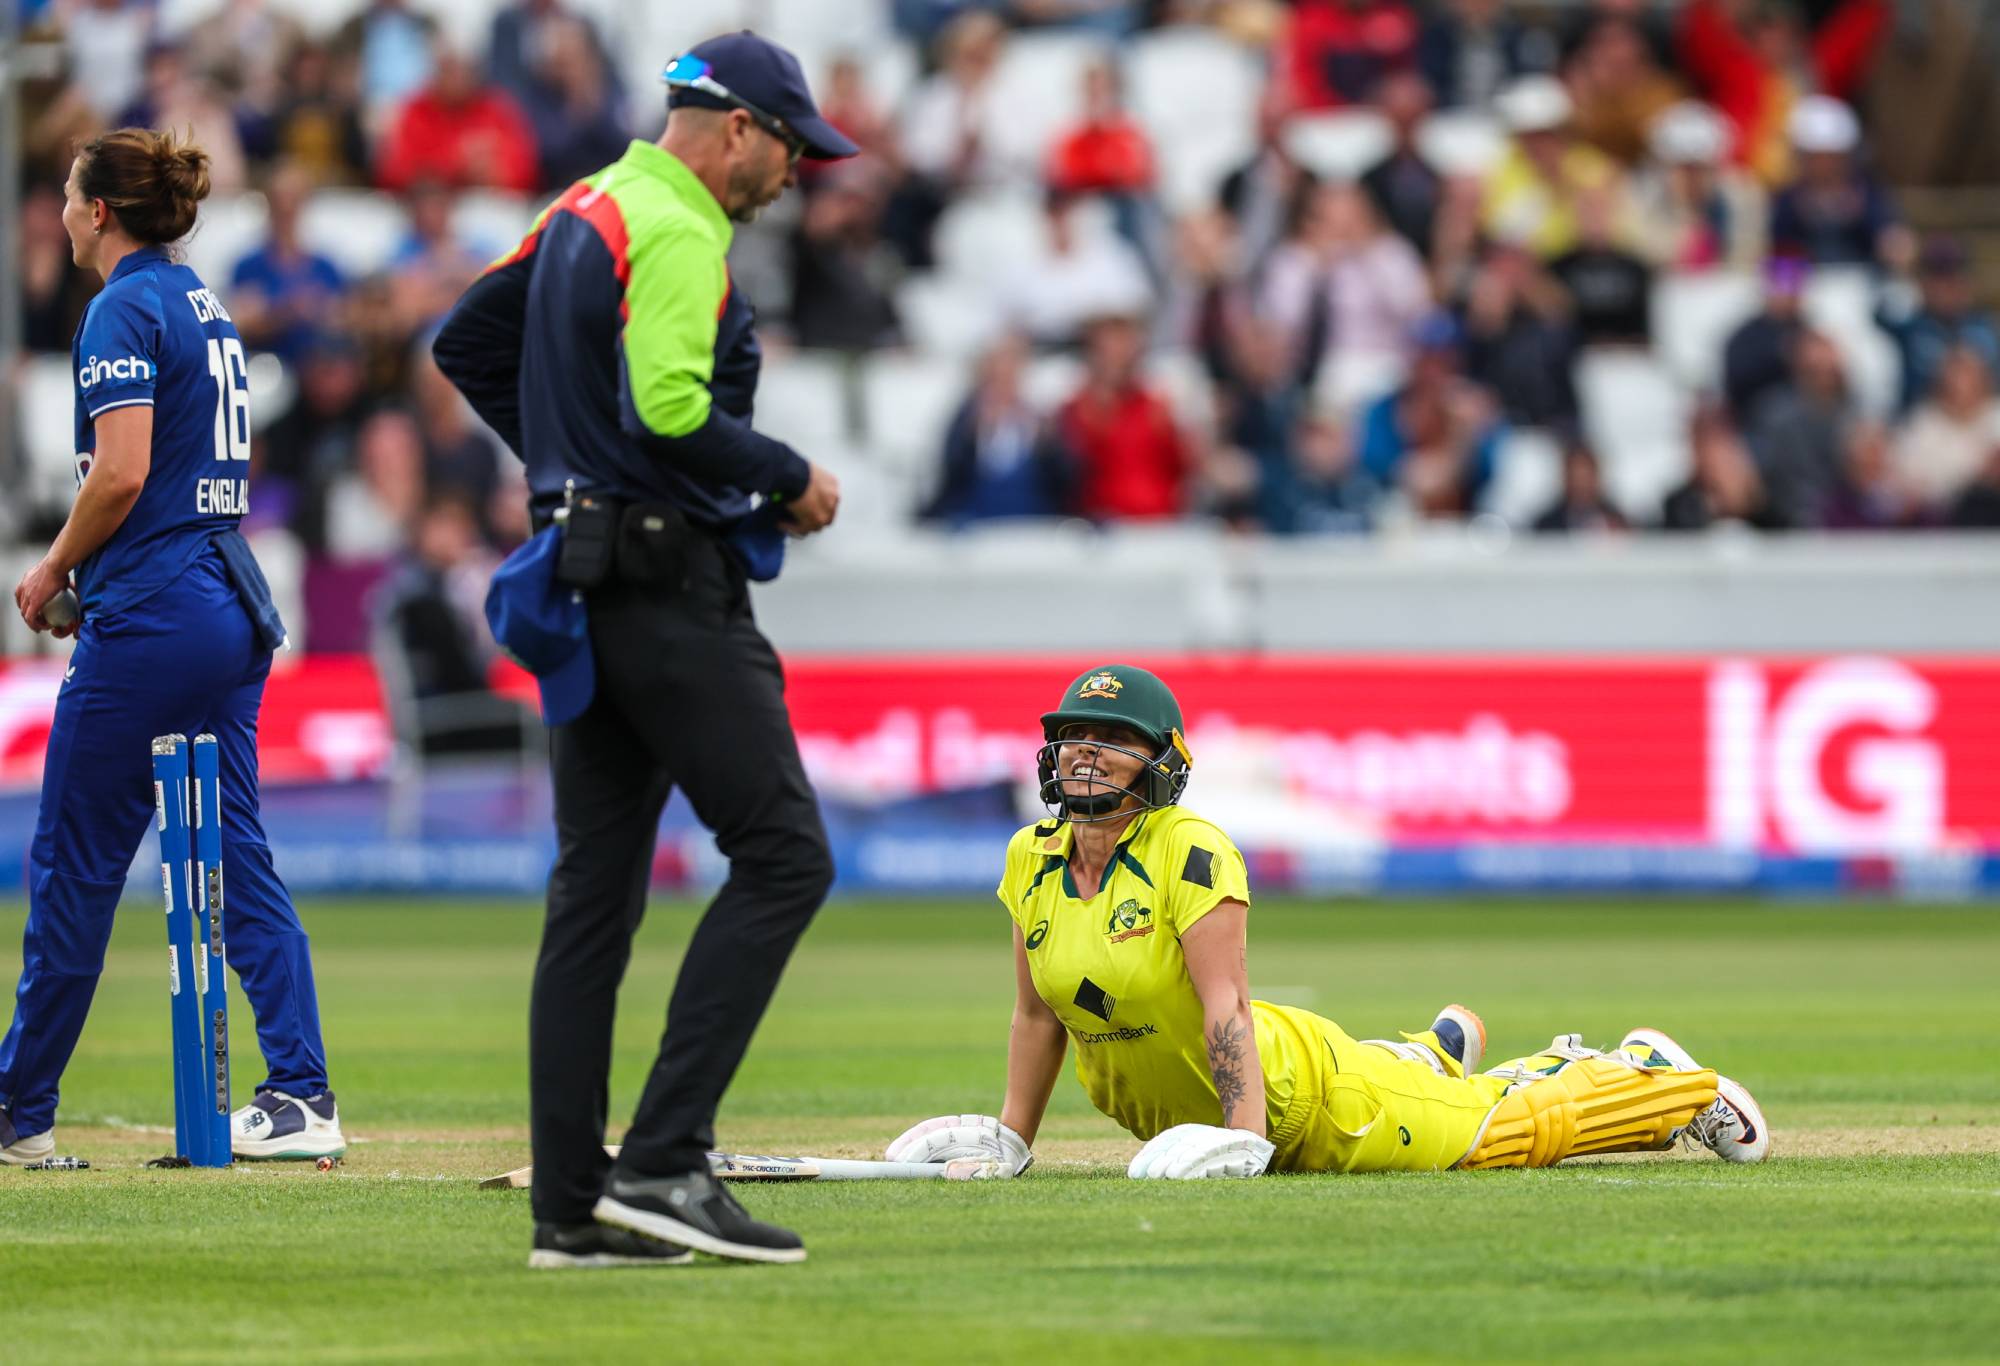 Australia's Ashleigh Gardner lays on the ground after being run out during the third one day international of the Women's Ashes Series at the at Cooper Associates County Ground, Taunton. Picture date: Tuesday July 18, 2023. (Photo by Steven Paston/PA Images via Getty Images)